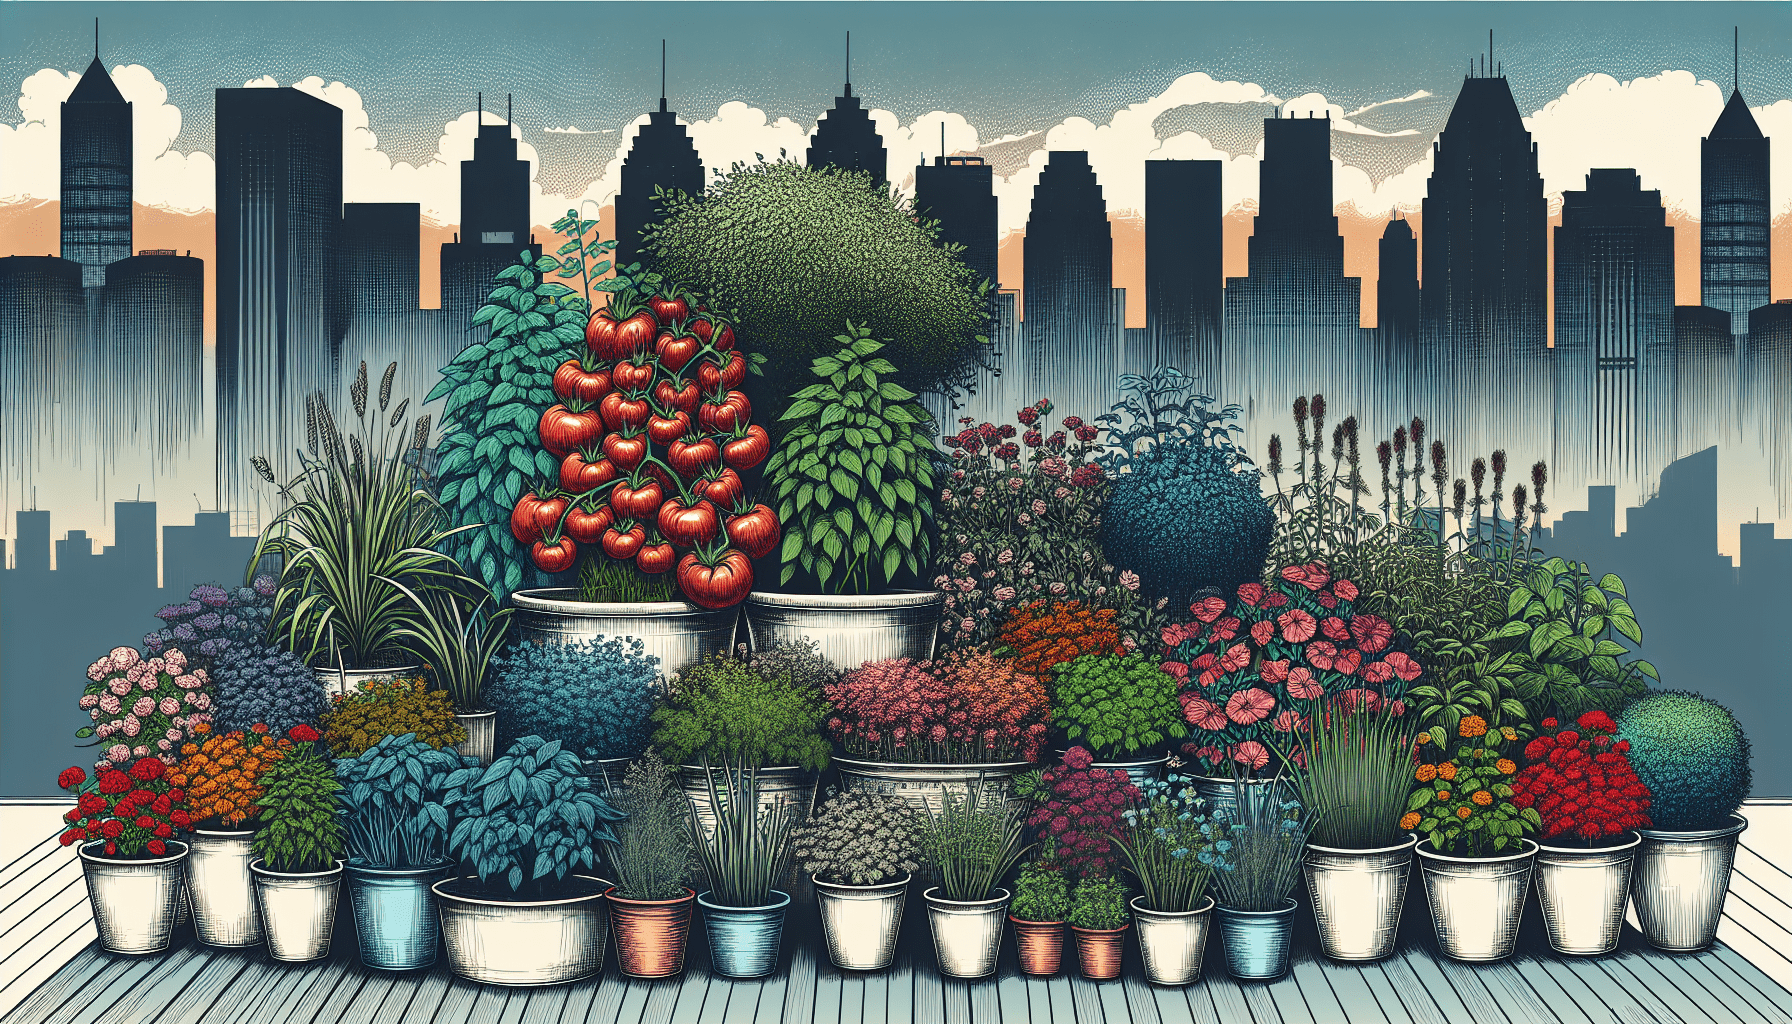 What Are The Best Practices For Urban Gardening?